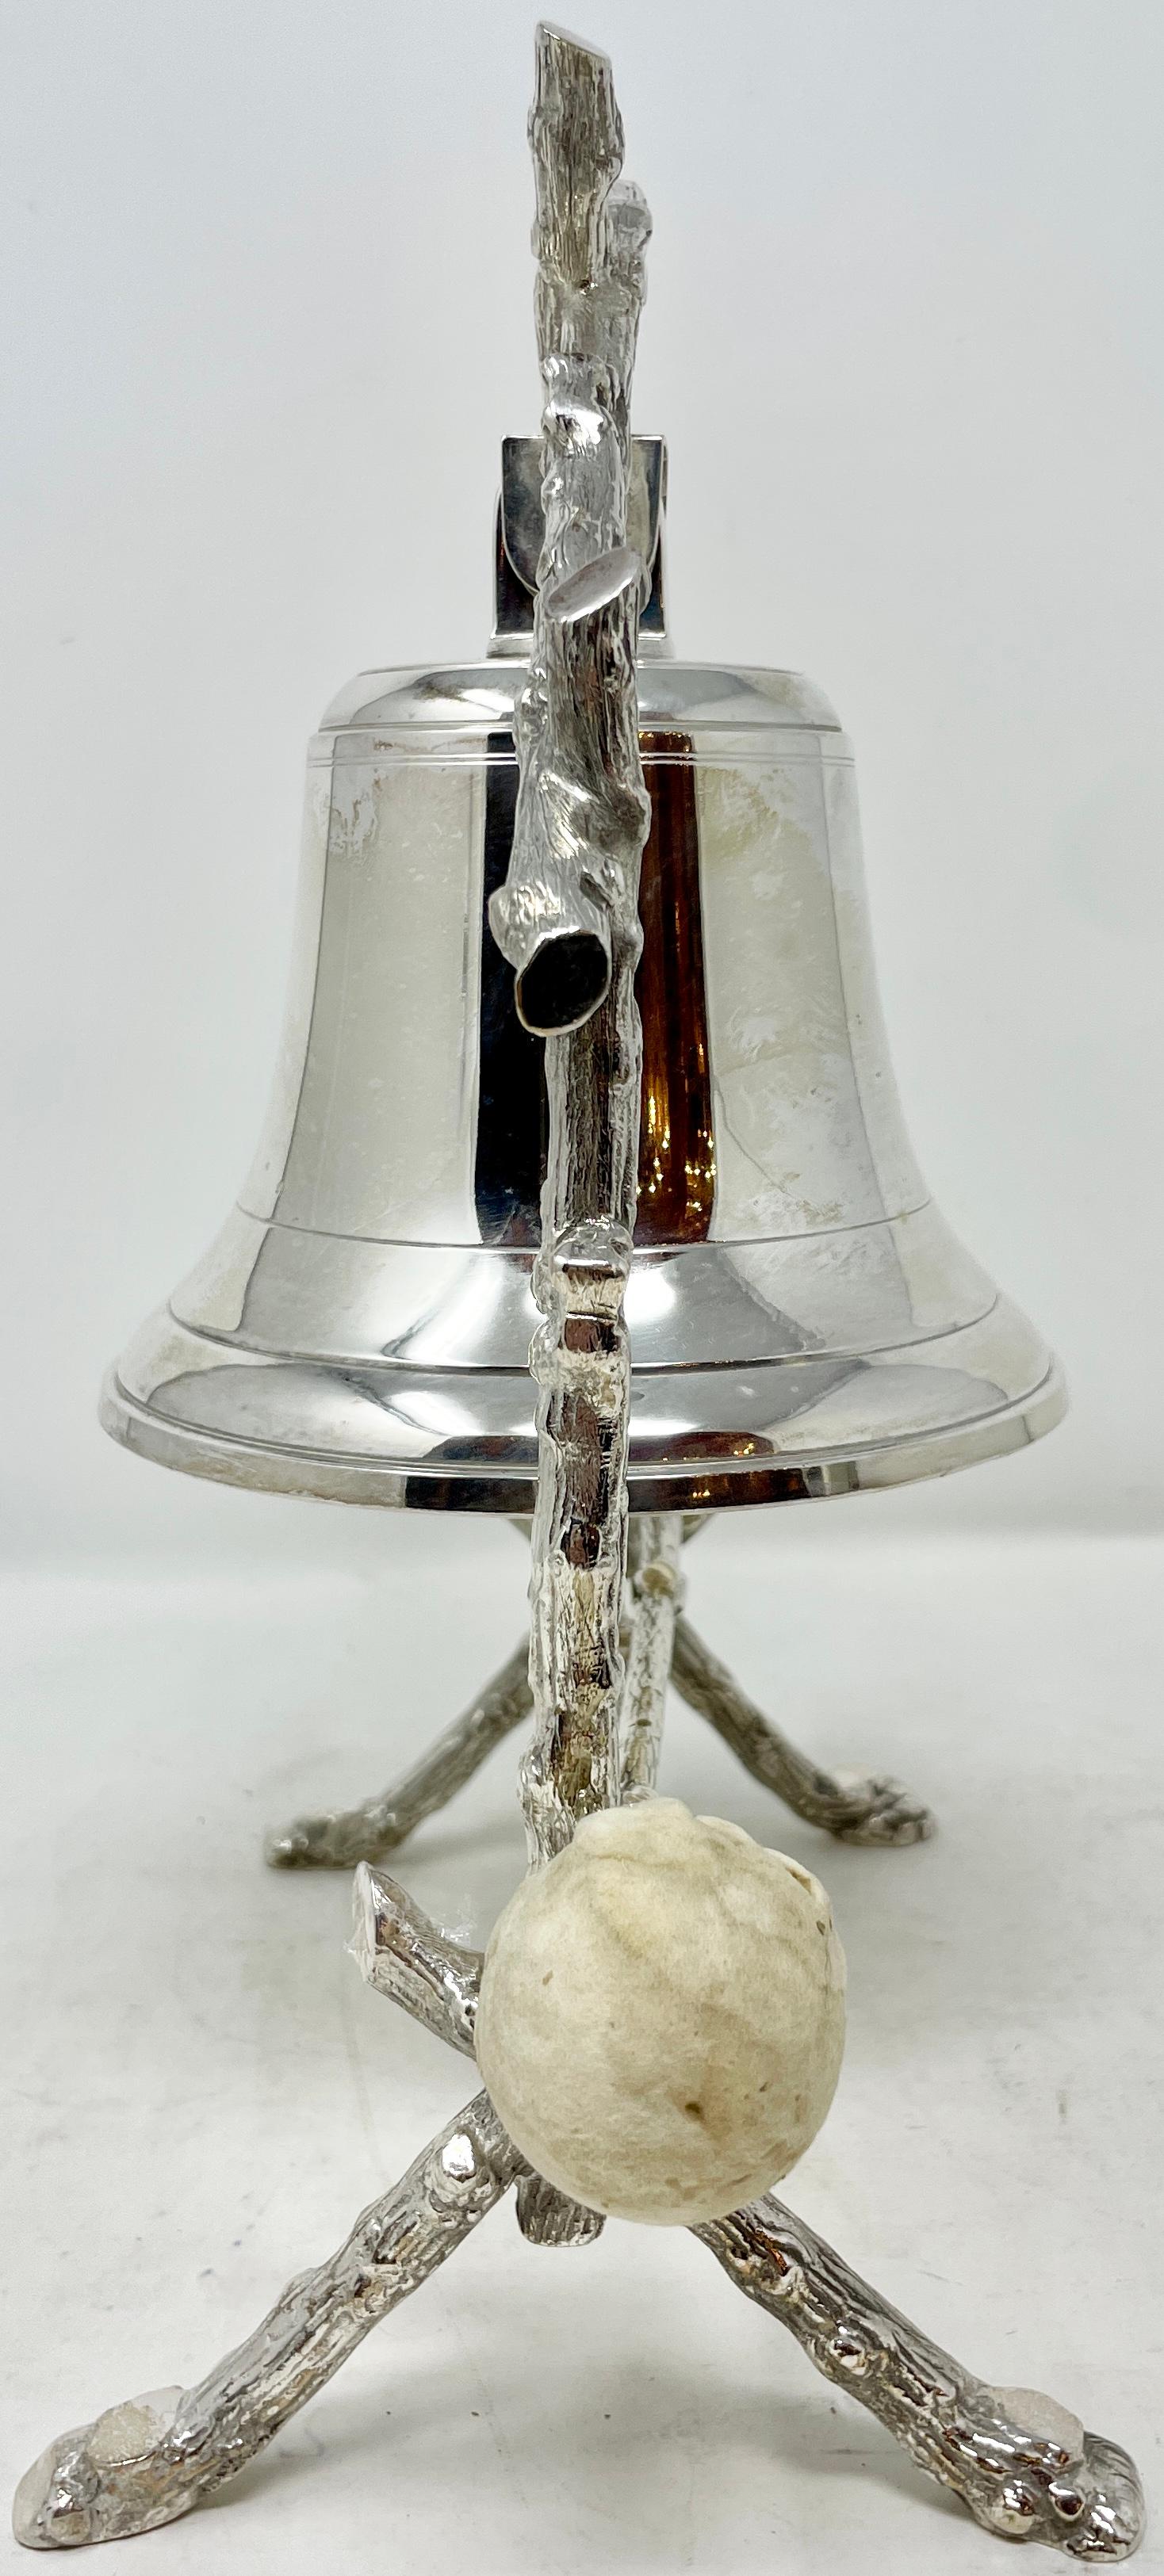 Sheffield Plate Antique English Sheffield Silver-Plated Dinner Bell with Striker Circa 1880-1890